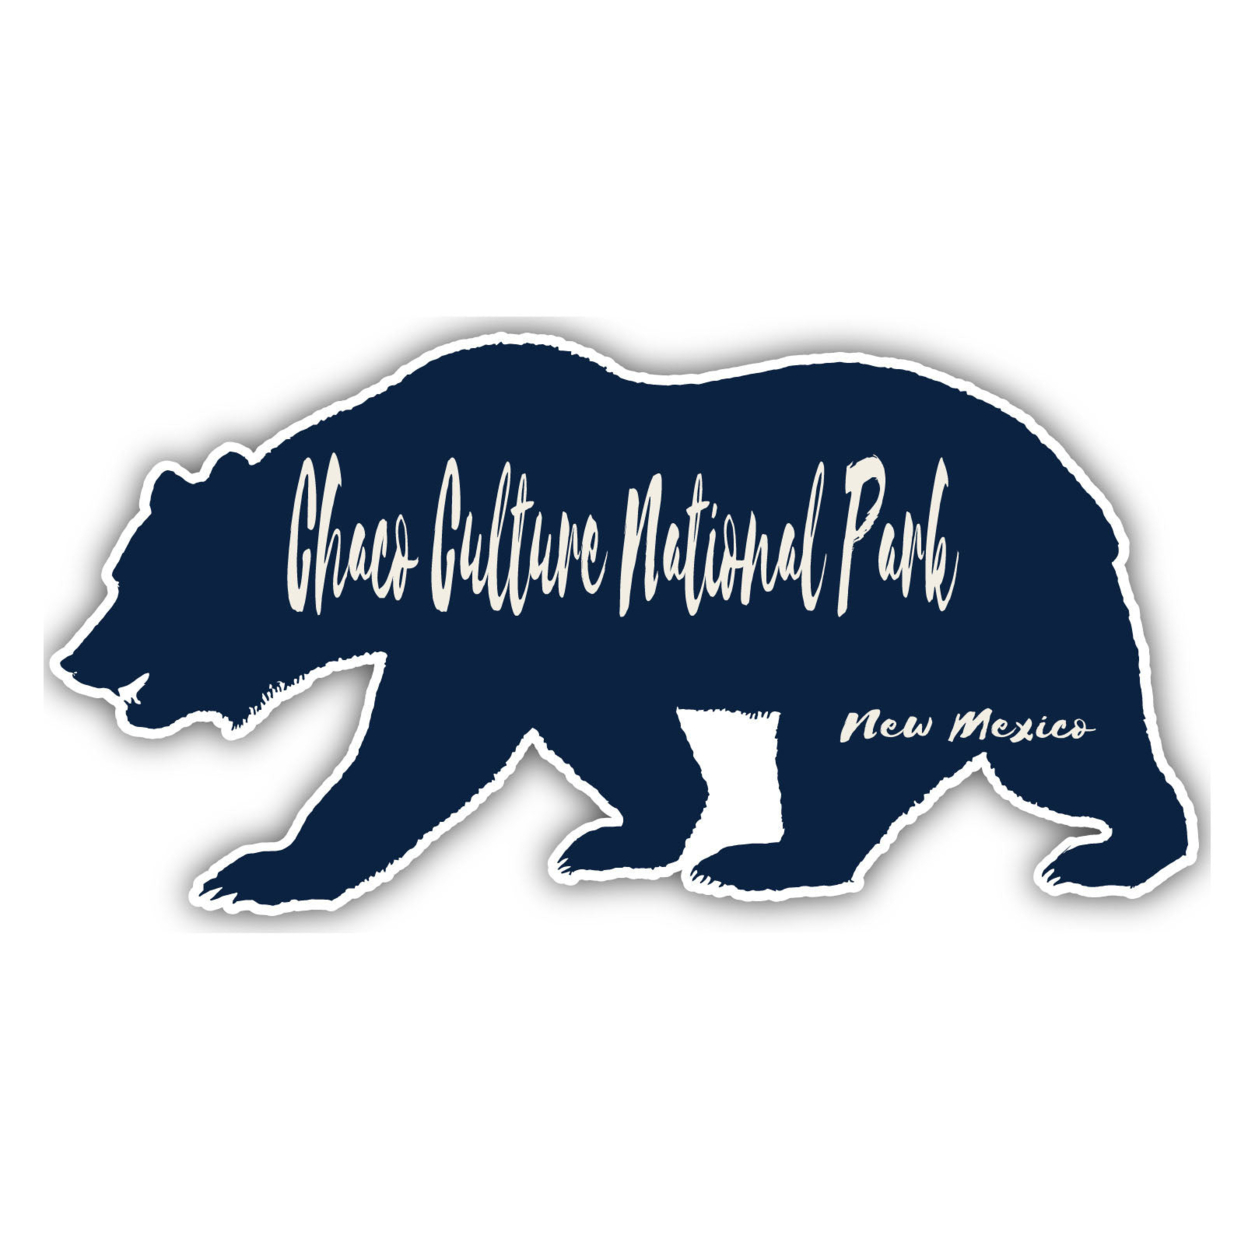 Chaco Culture National Park New Mexico Souvenir Decorative Stickers (Choose Theme And Size) - Single Unit, 12-Inch, Bear